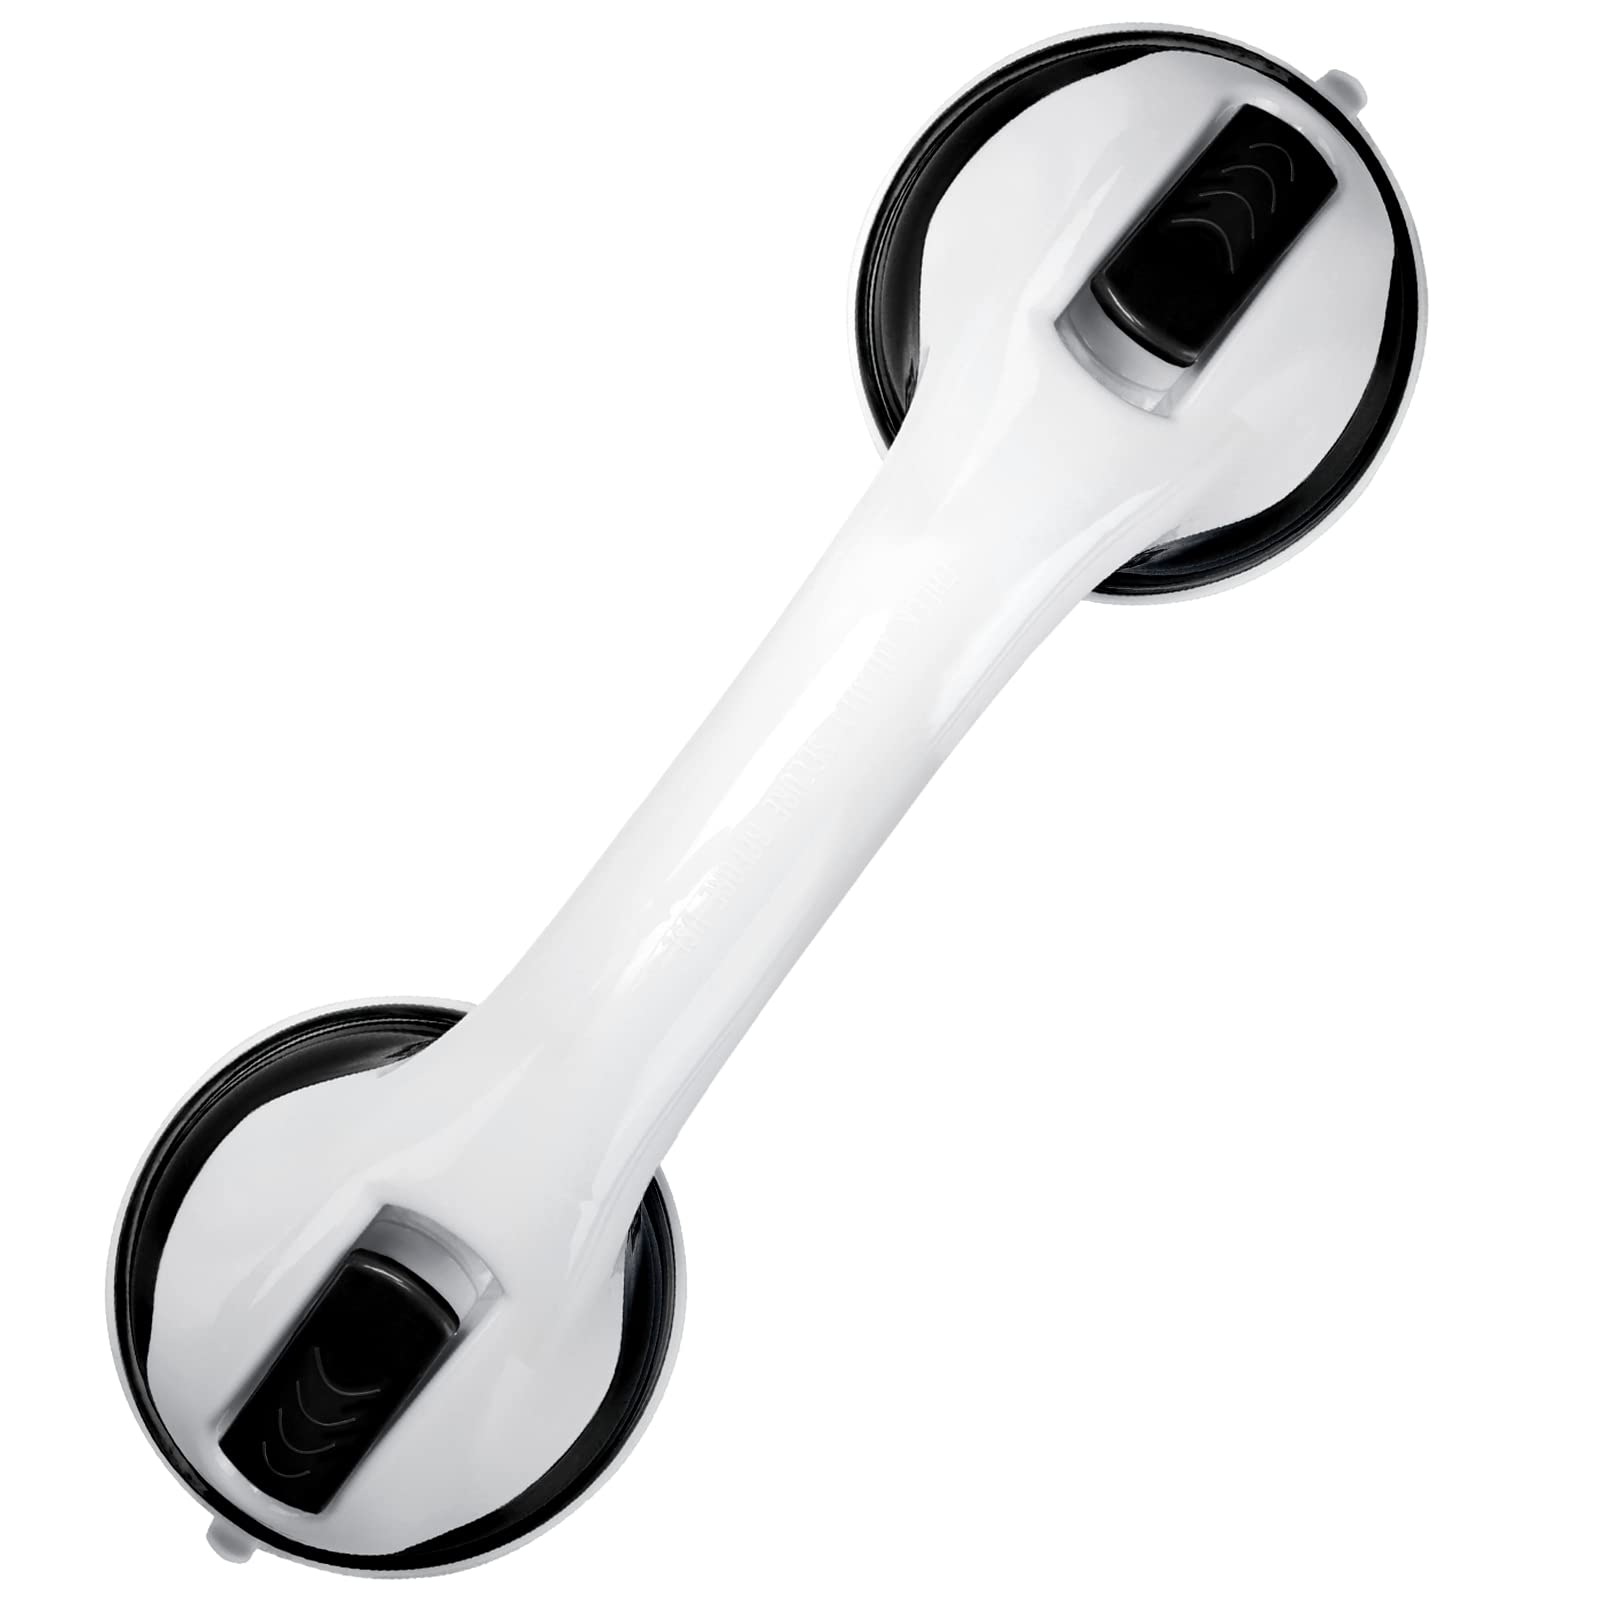 Shower Handle 12 inch Grab Bars for Bathroom Shower Handle with Strong Hold Suction Cup Grip Grab in Bathroom Bath Handle Grab Bars for Bathroom Safety Grab Bar Black